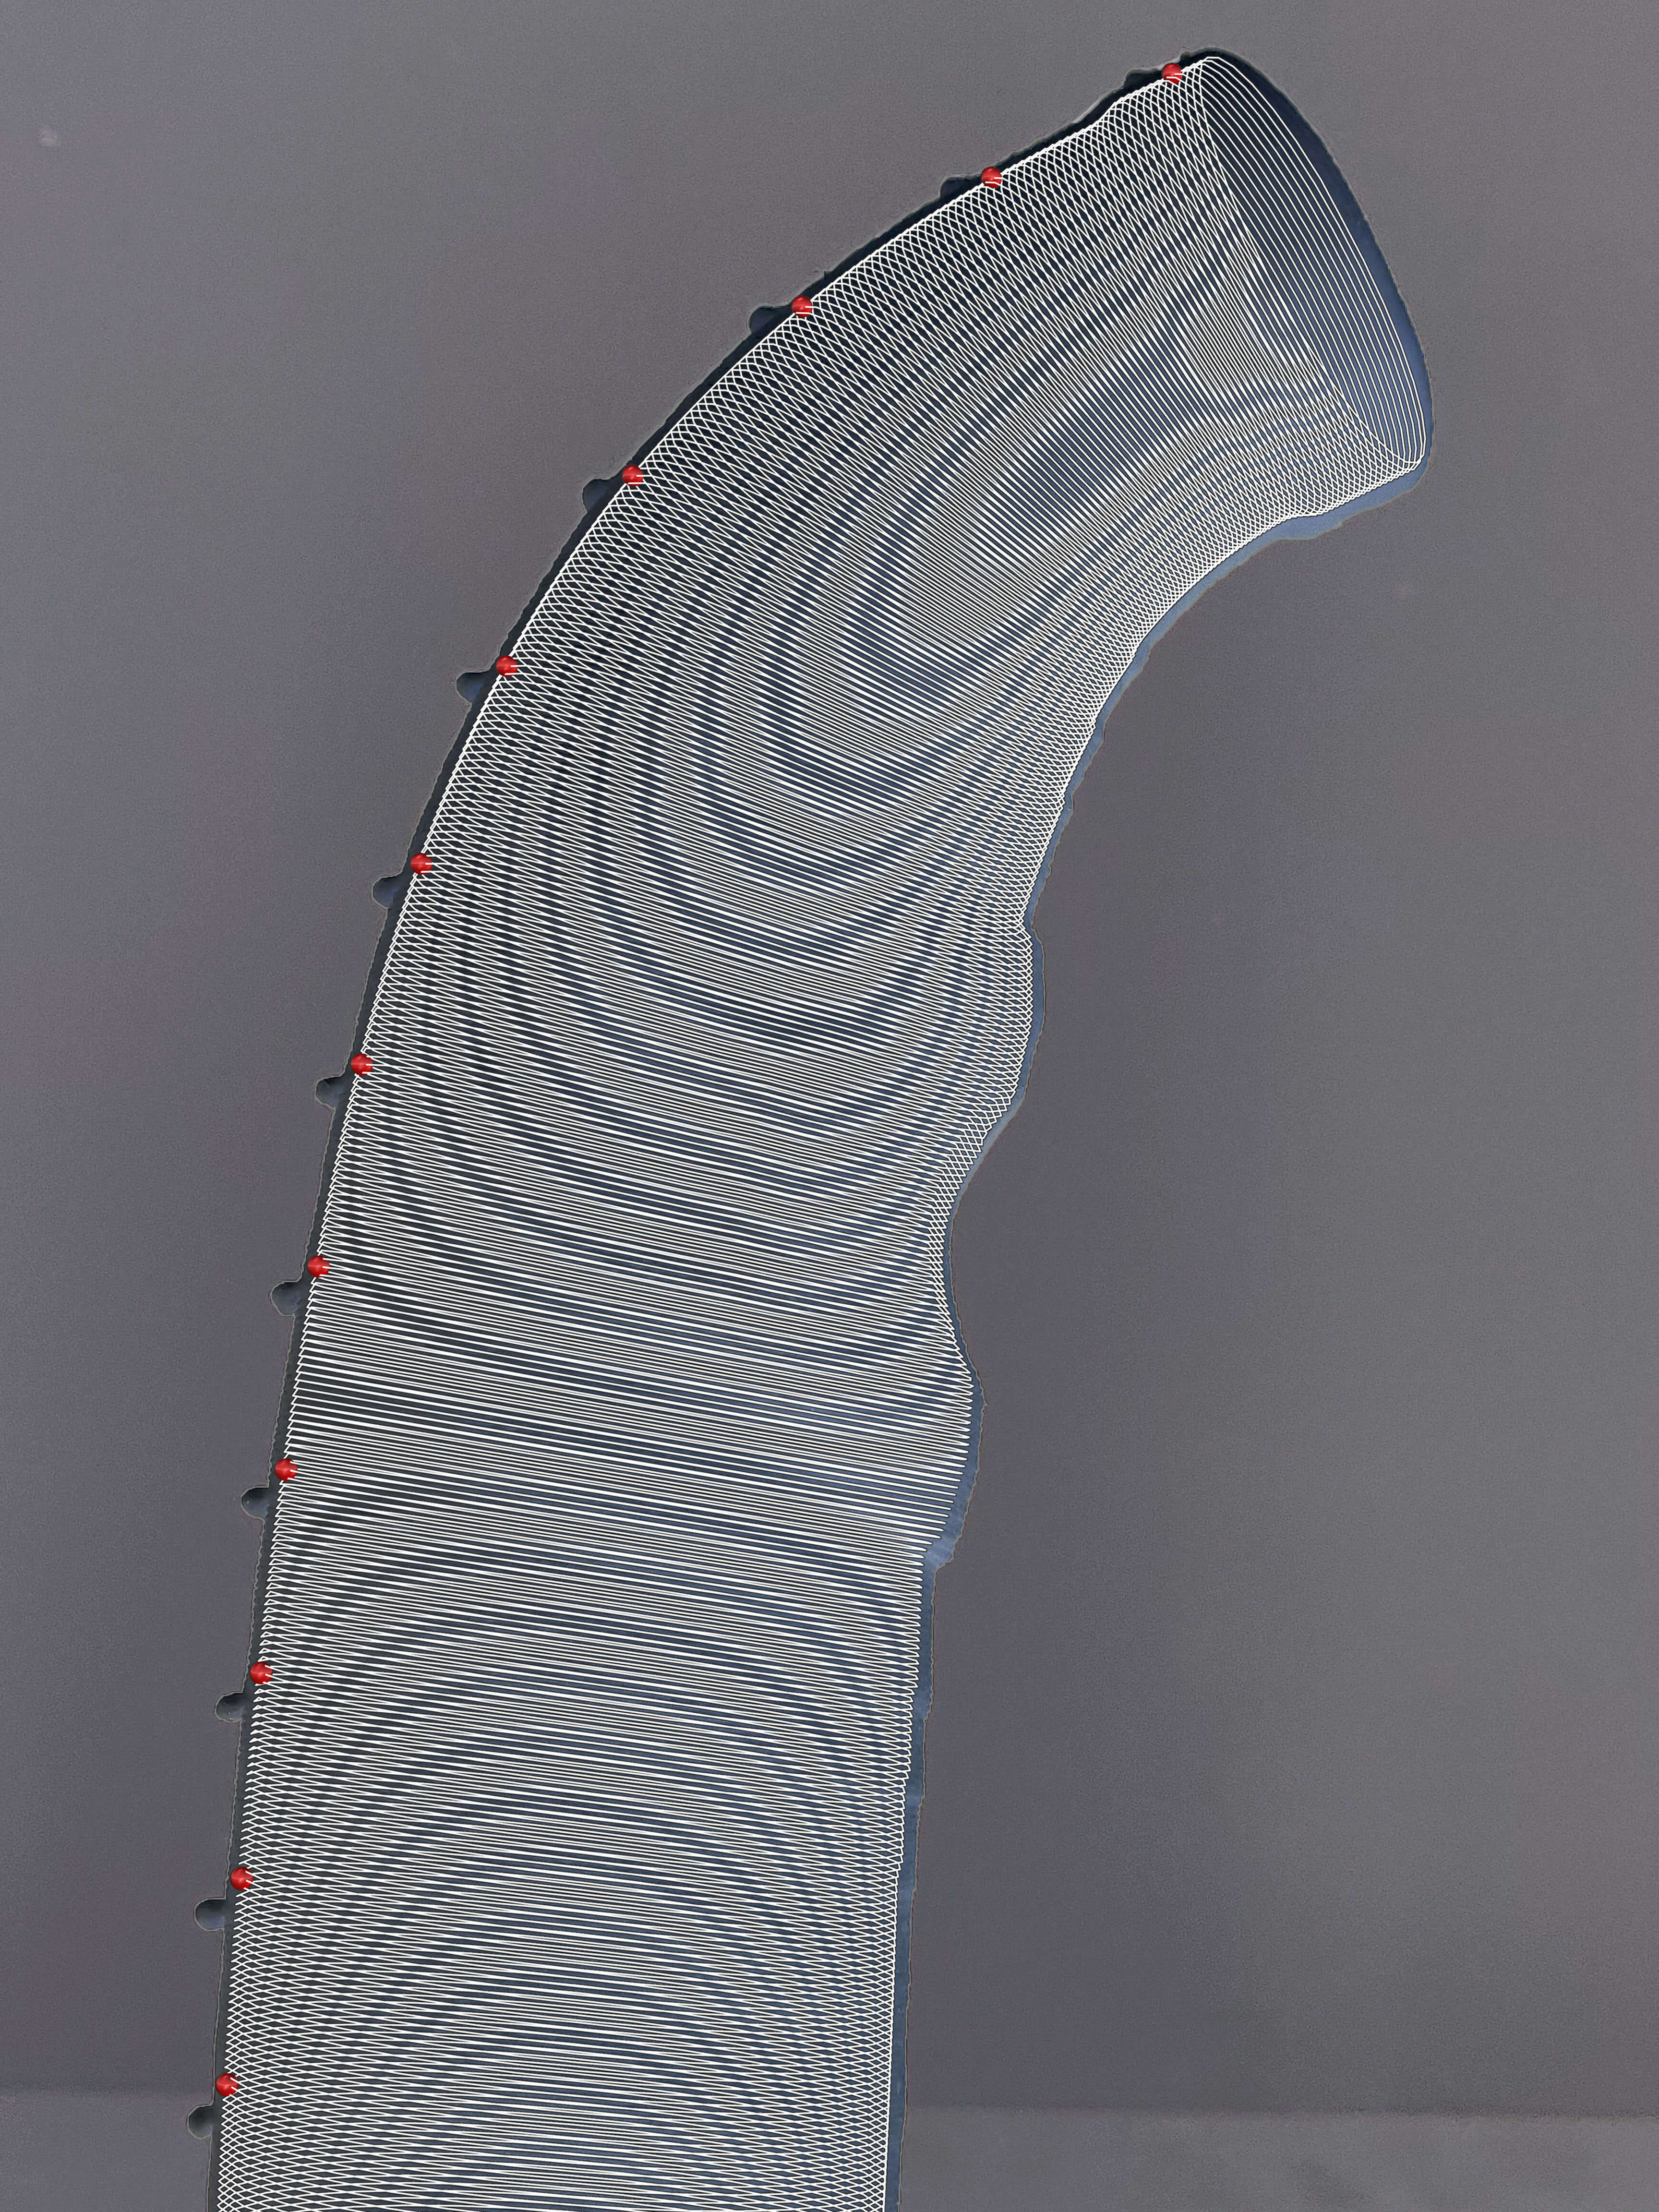 Digital overlay of G2 tube, highlighting the toolpaths of the robotic cell